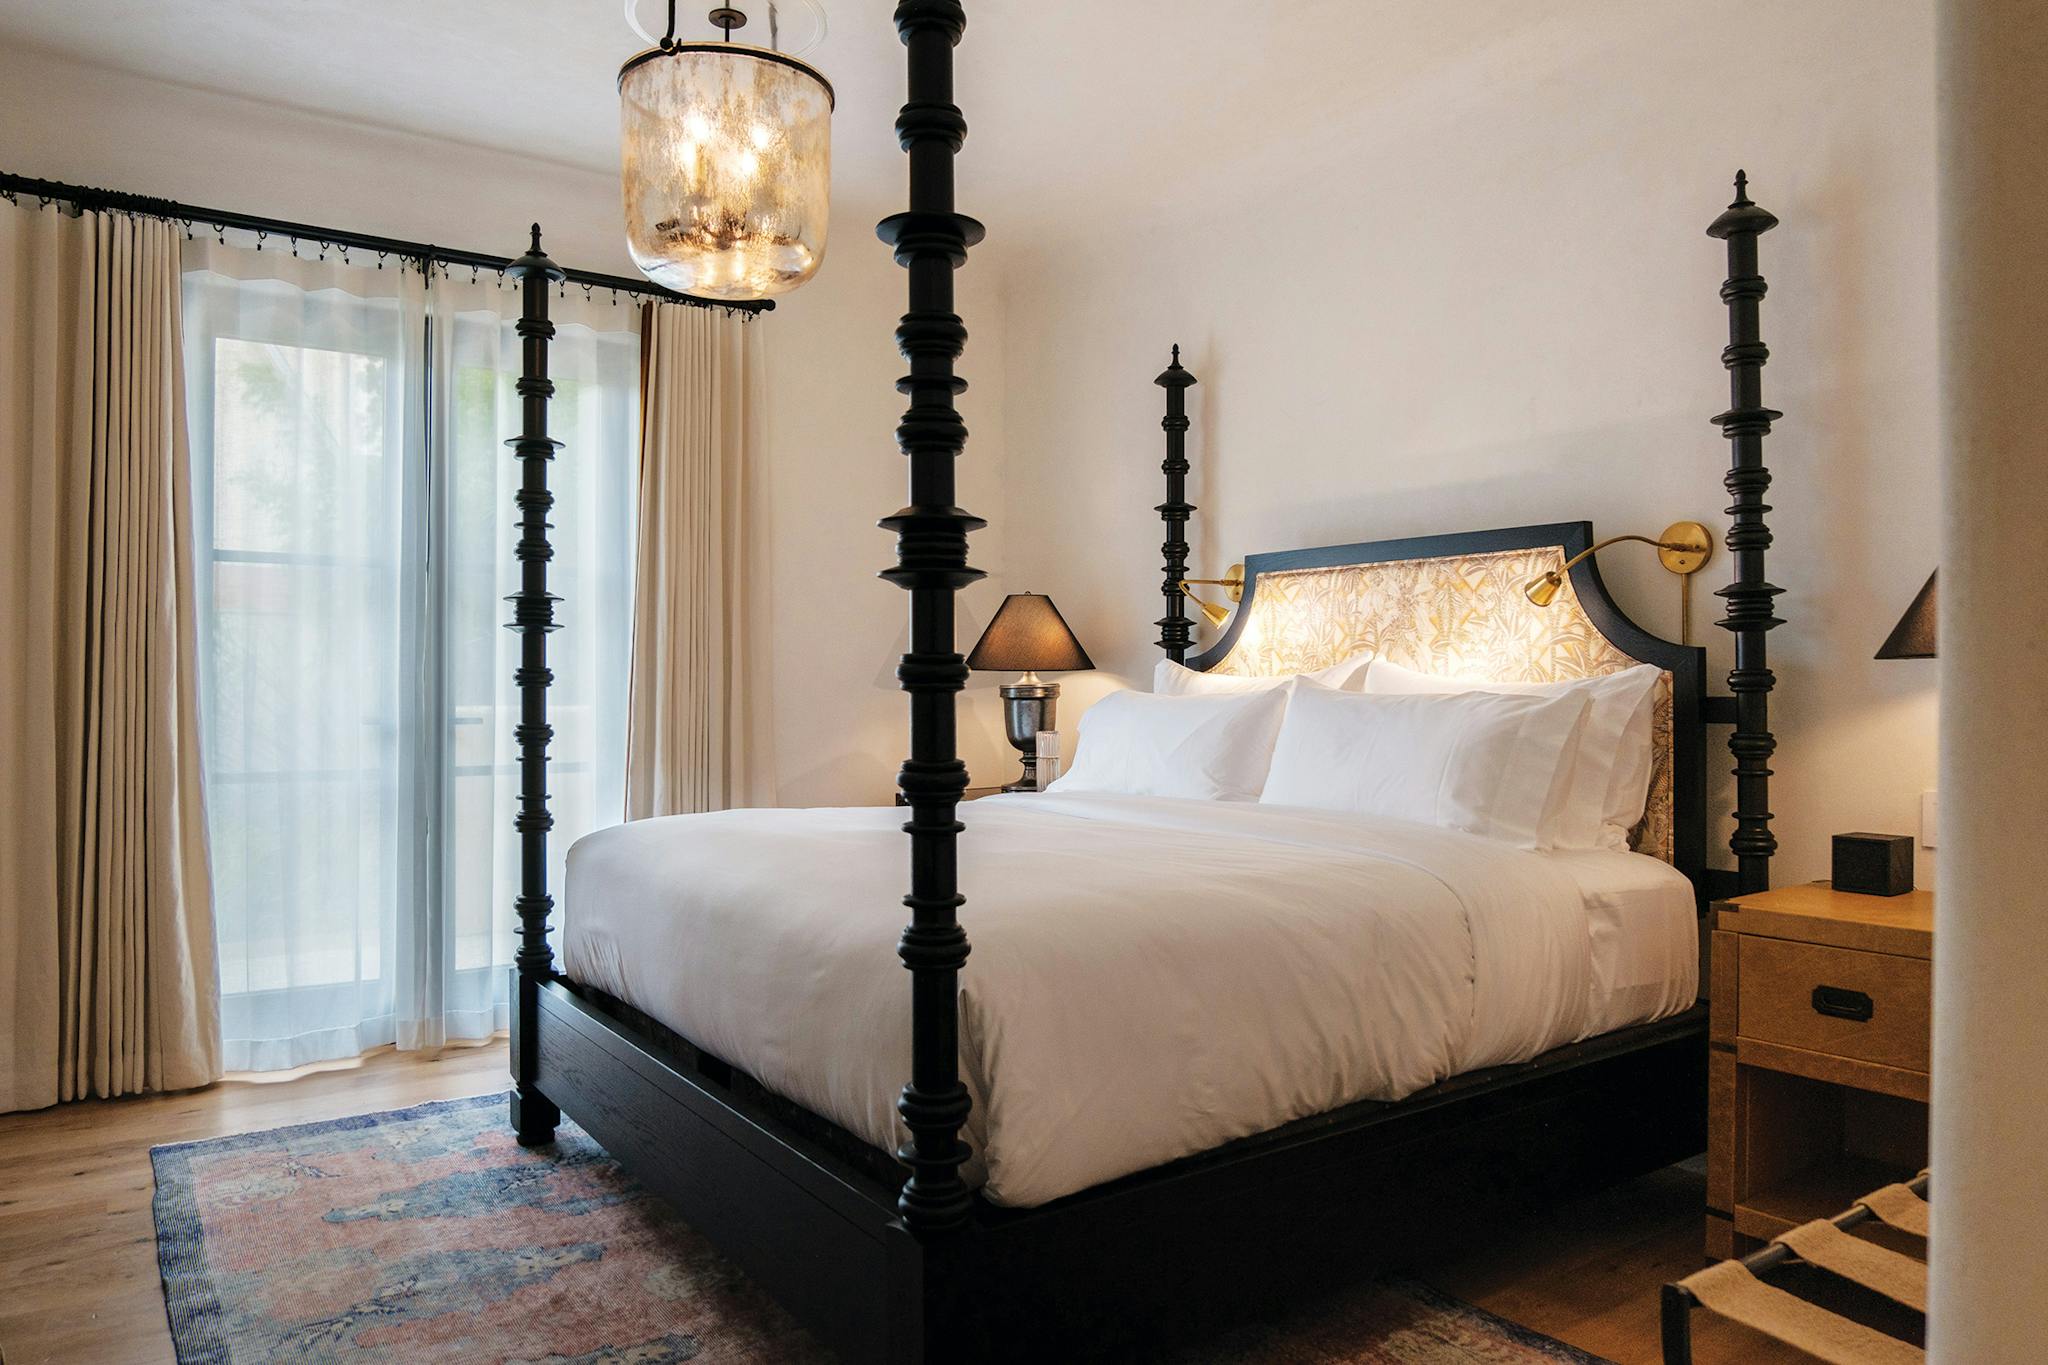 Antique light fixture, tall bed posts, and soft lighting in the Commodore Perry's new rooms.